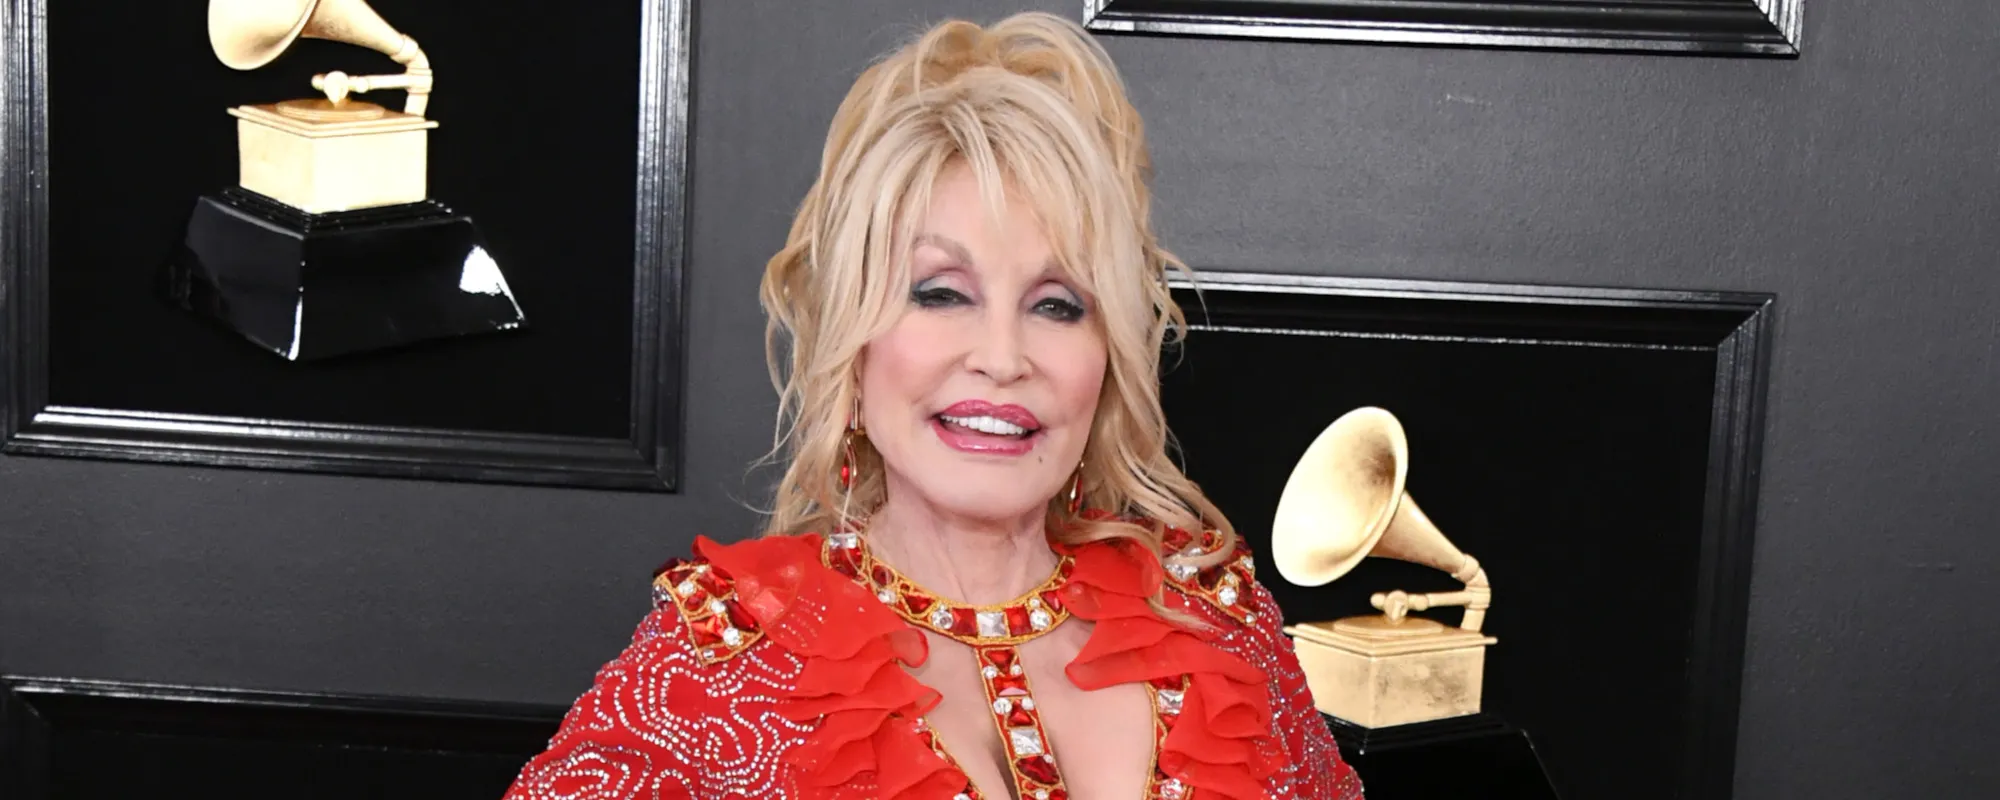 Dolly Parton is the Queen of Country Music and… the Fax Machine?